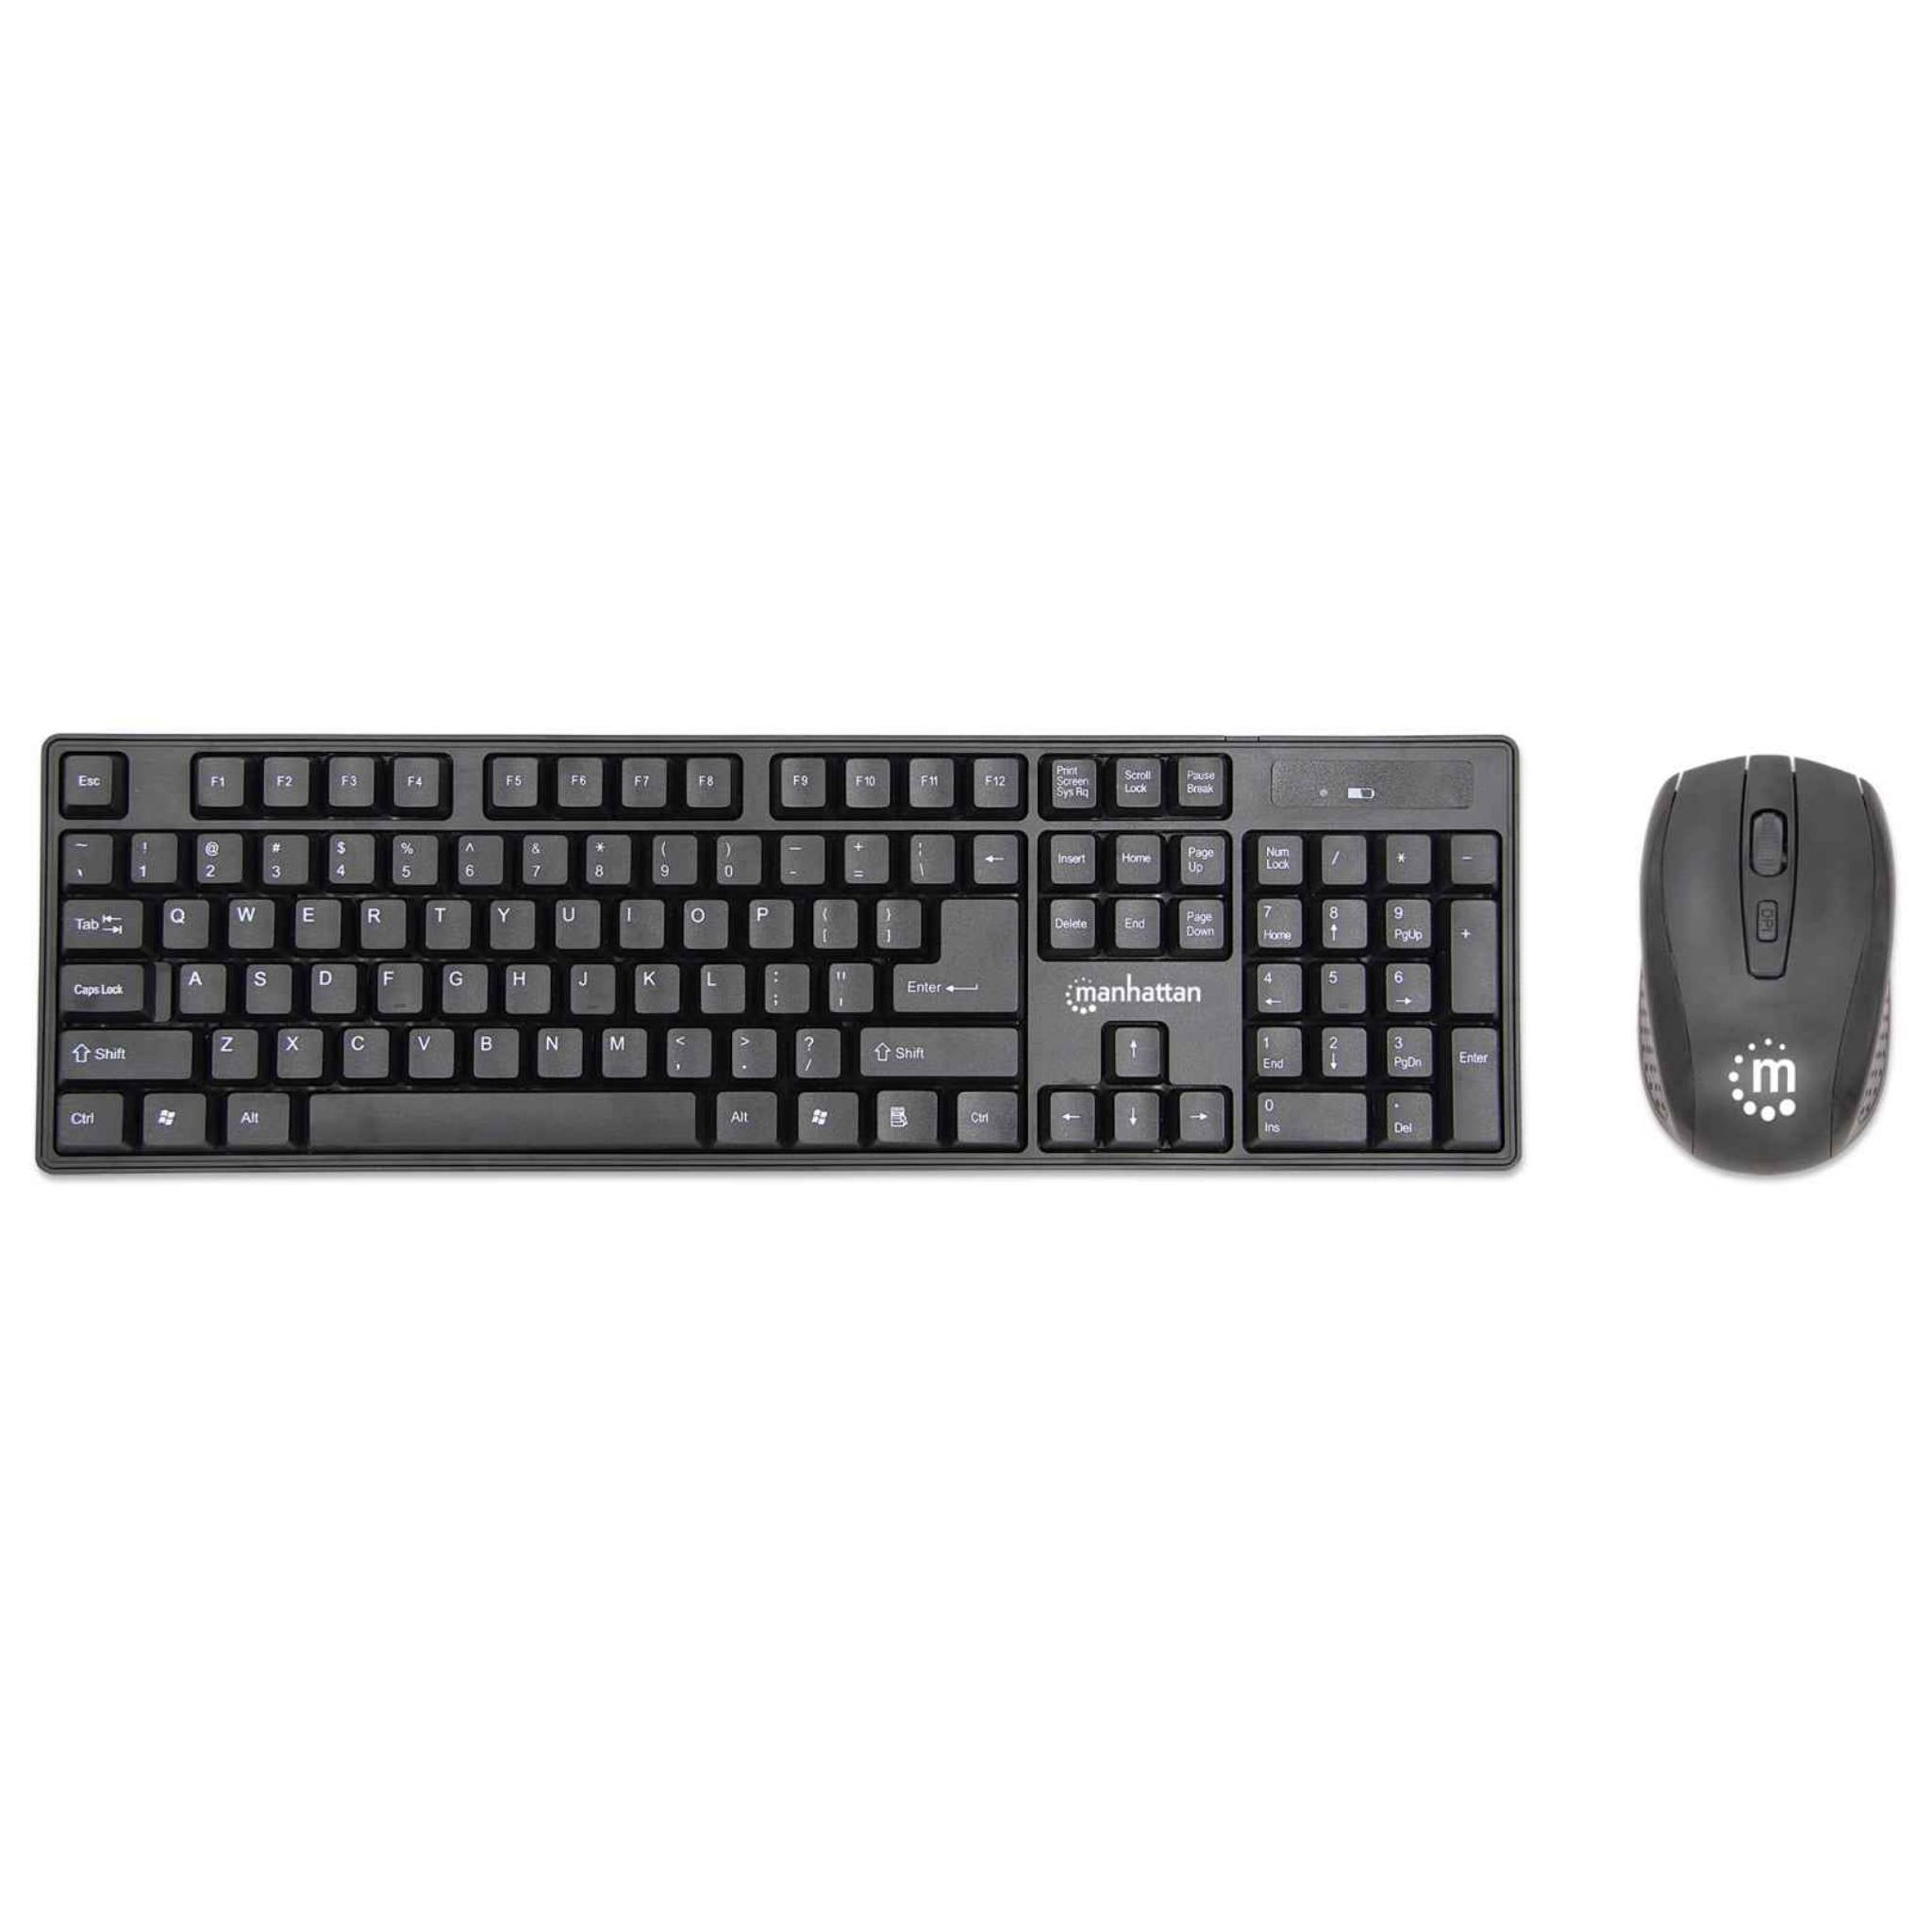 WIRELESS KEYBOARD AND OPTICAL MOUSE SET ONE 2.4GHZ USB-DONGLE CONNECTS BOTH